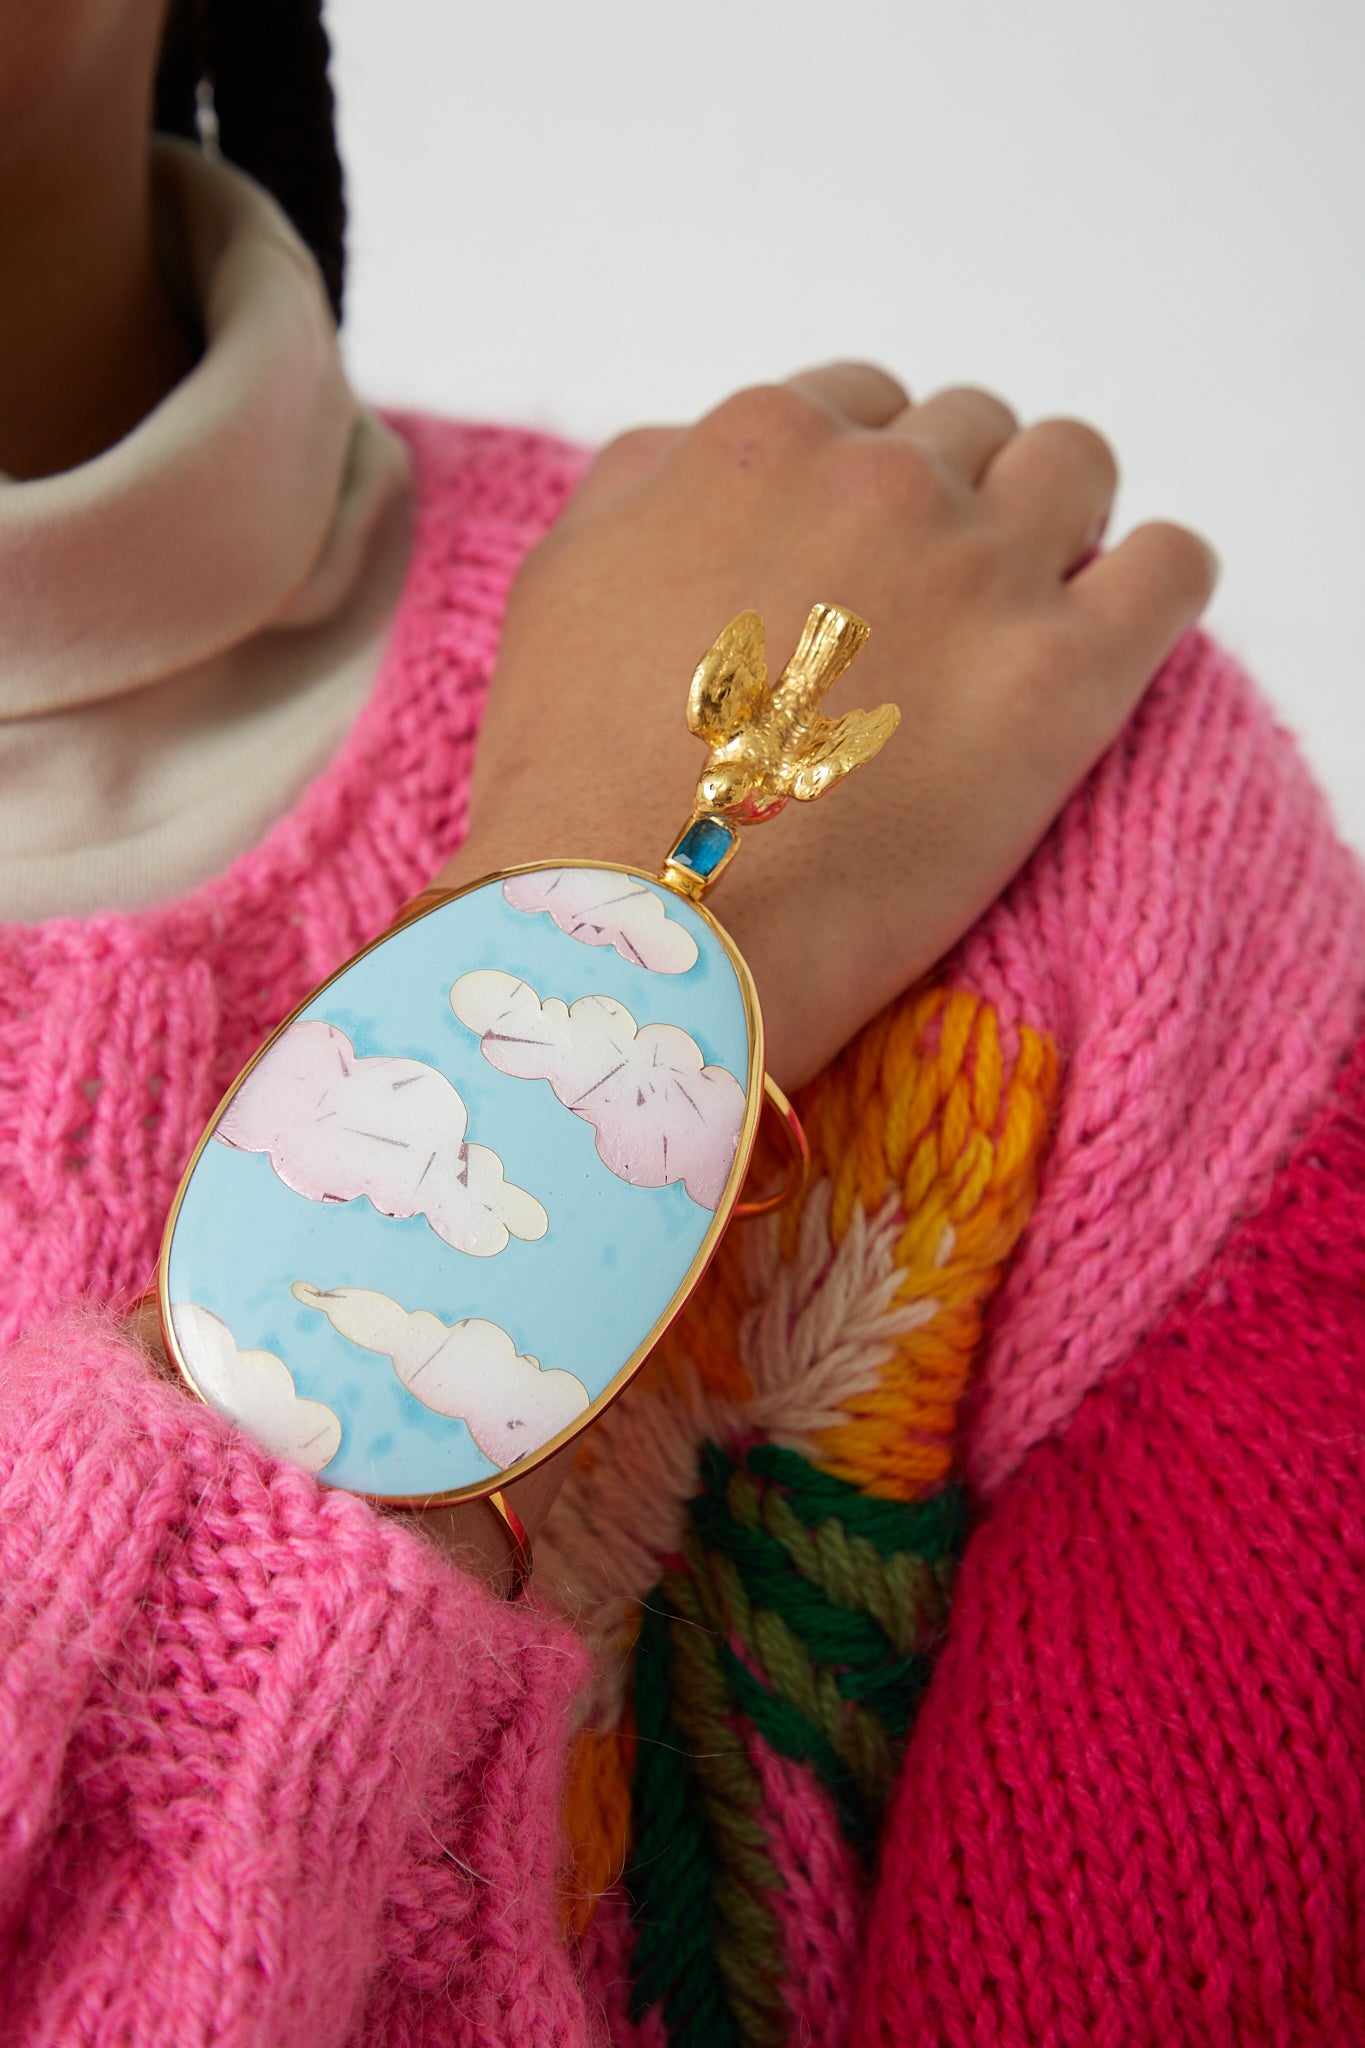 A woman wearing a pink sweater with a blue and white cuff adorned with a Sofio Gongli Bracelet in Clouds with Bird.